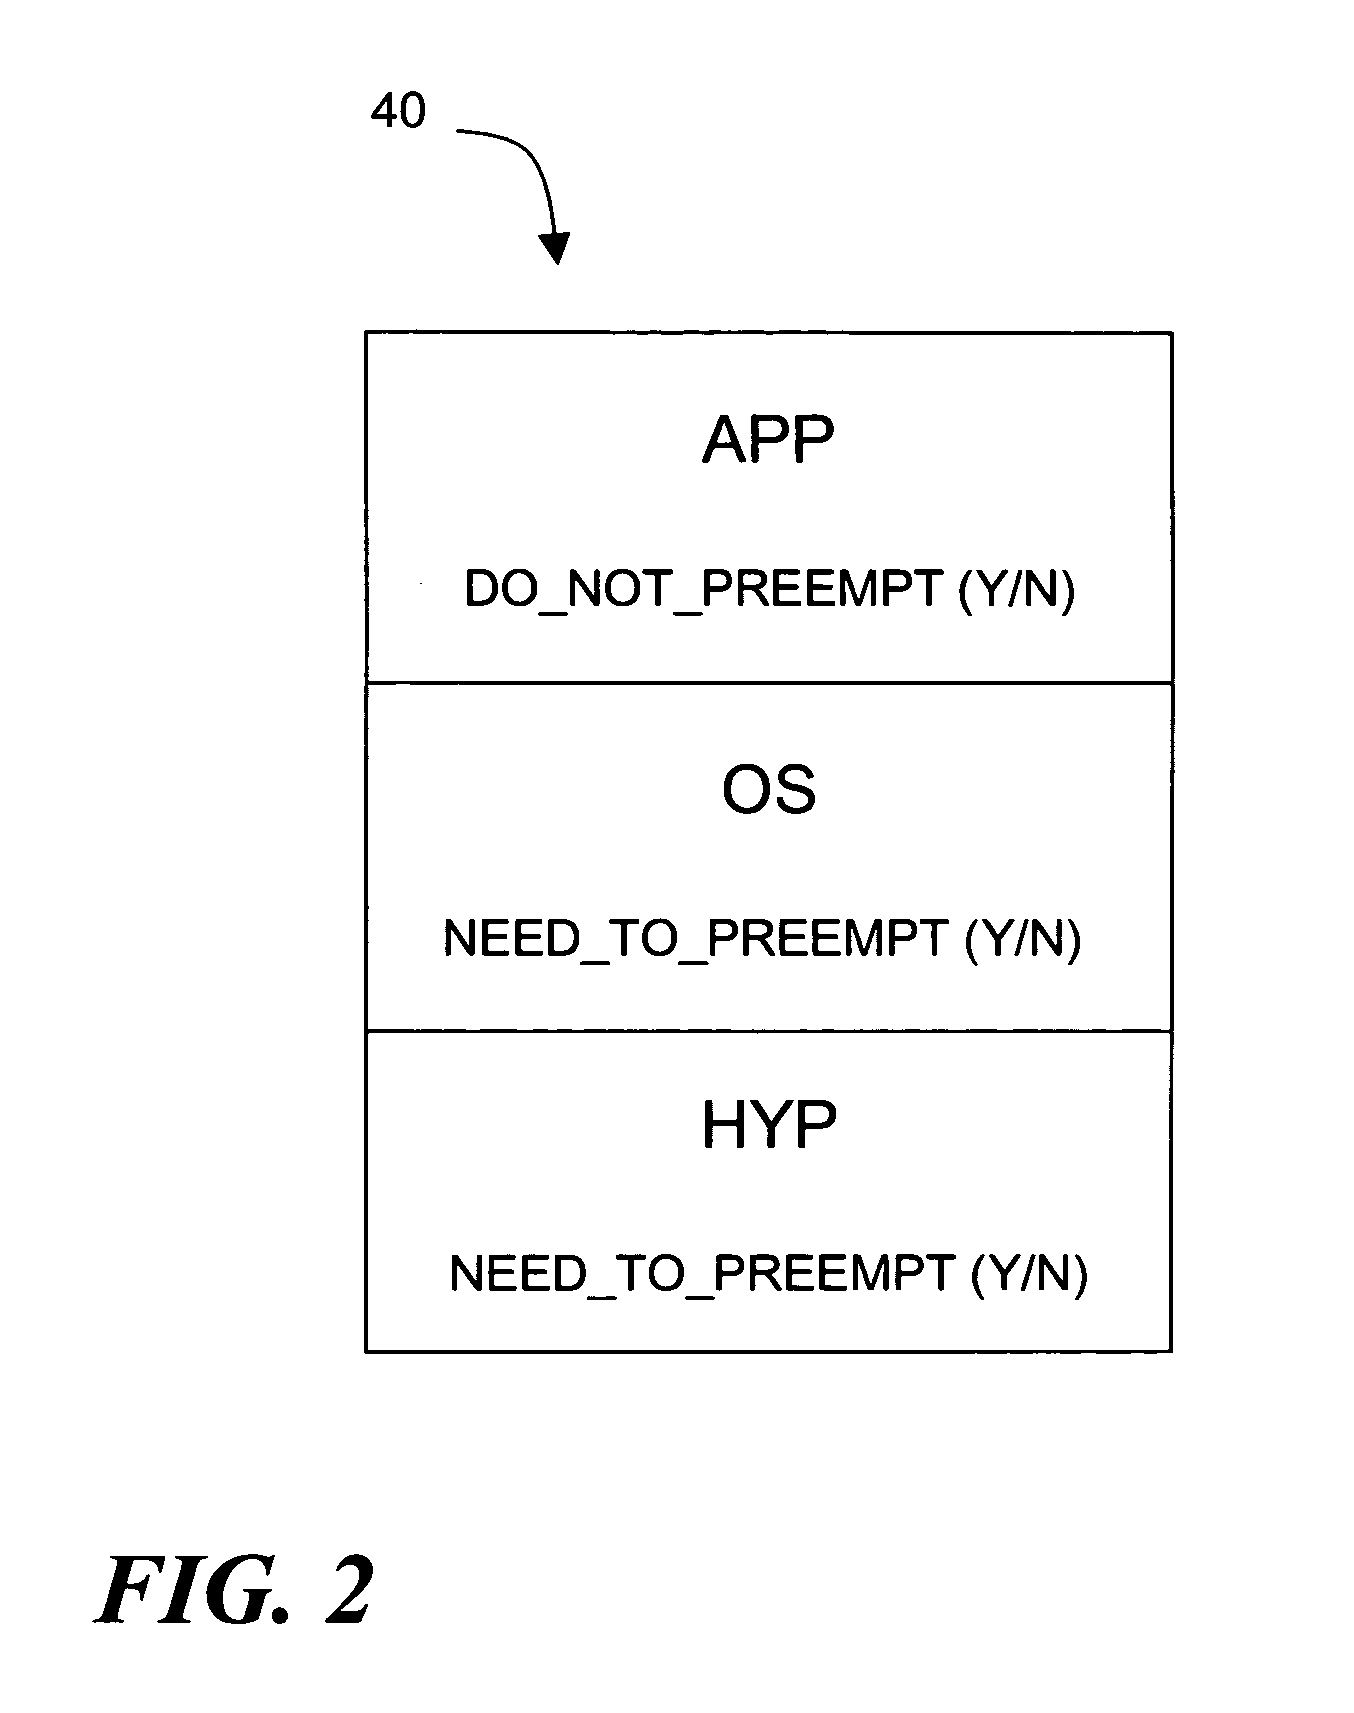 Efficient sharing of memory between applications running under different operating systems on a shared hardware system